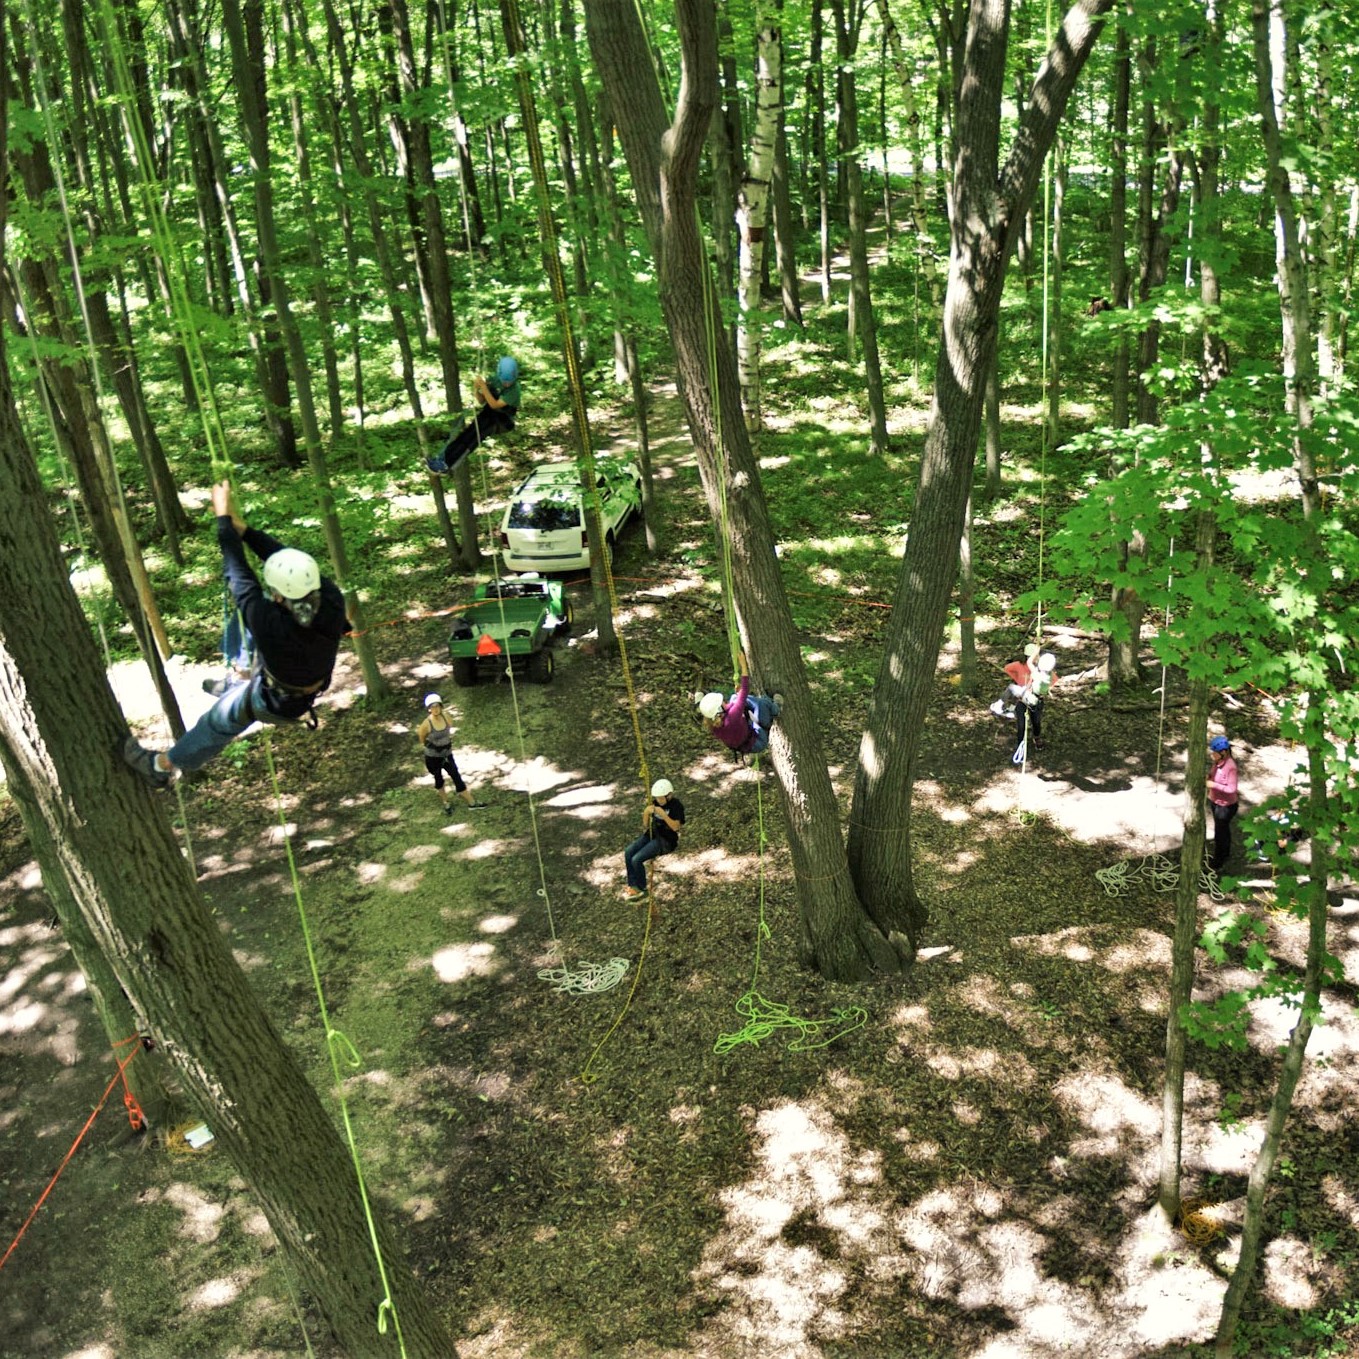 view from the treetops at Riveredge of a group of people tree climbing with ropes